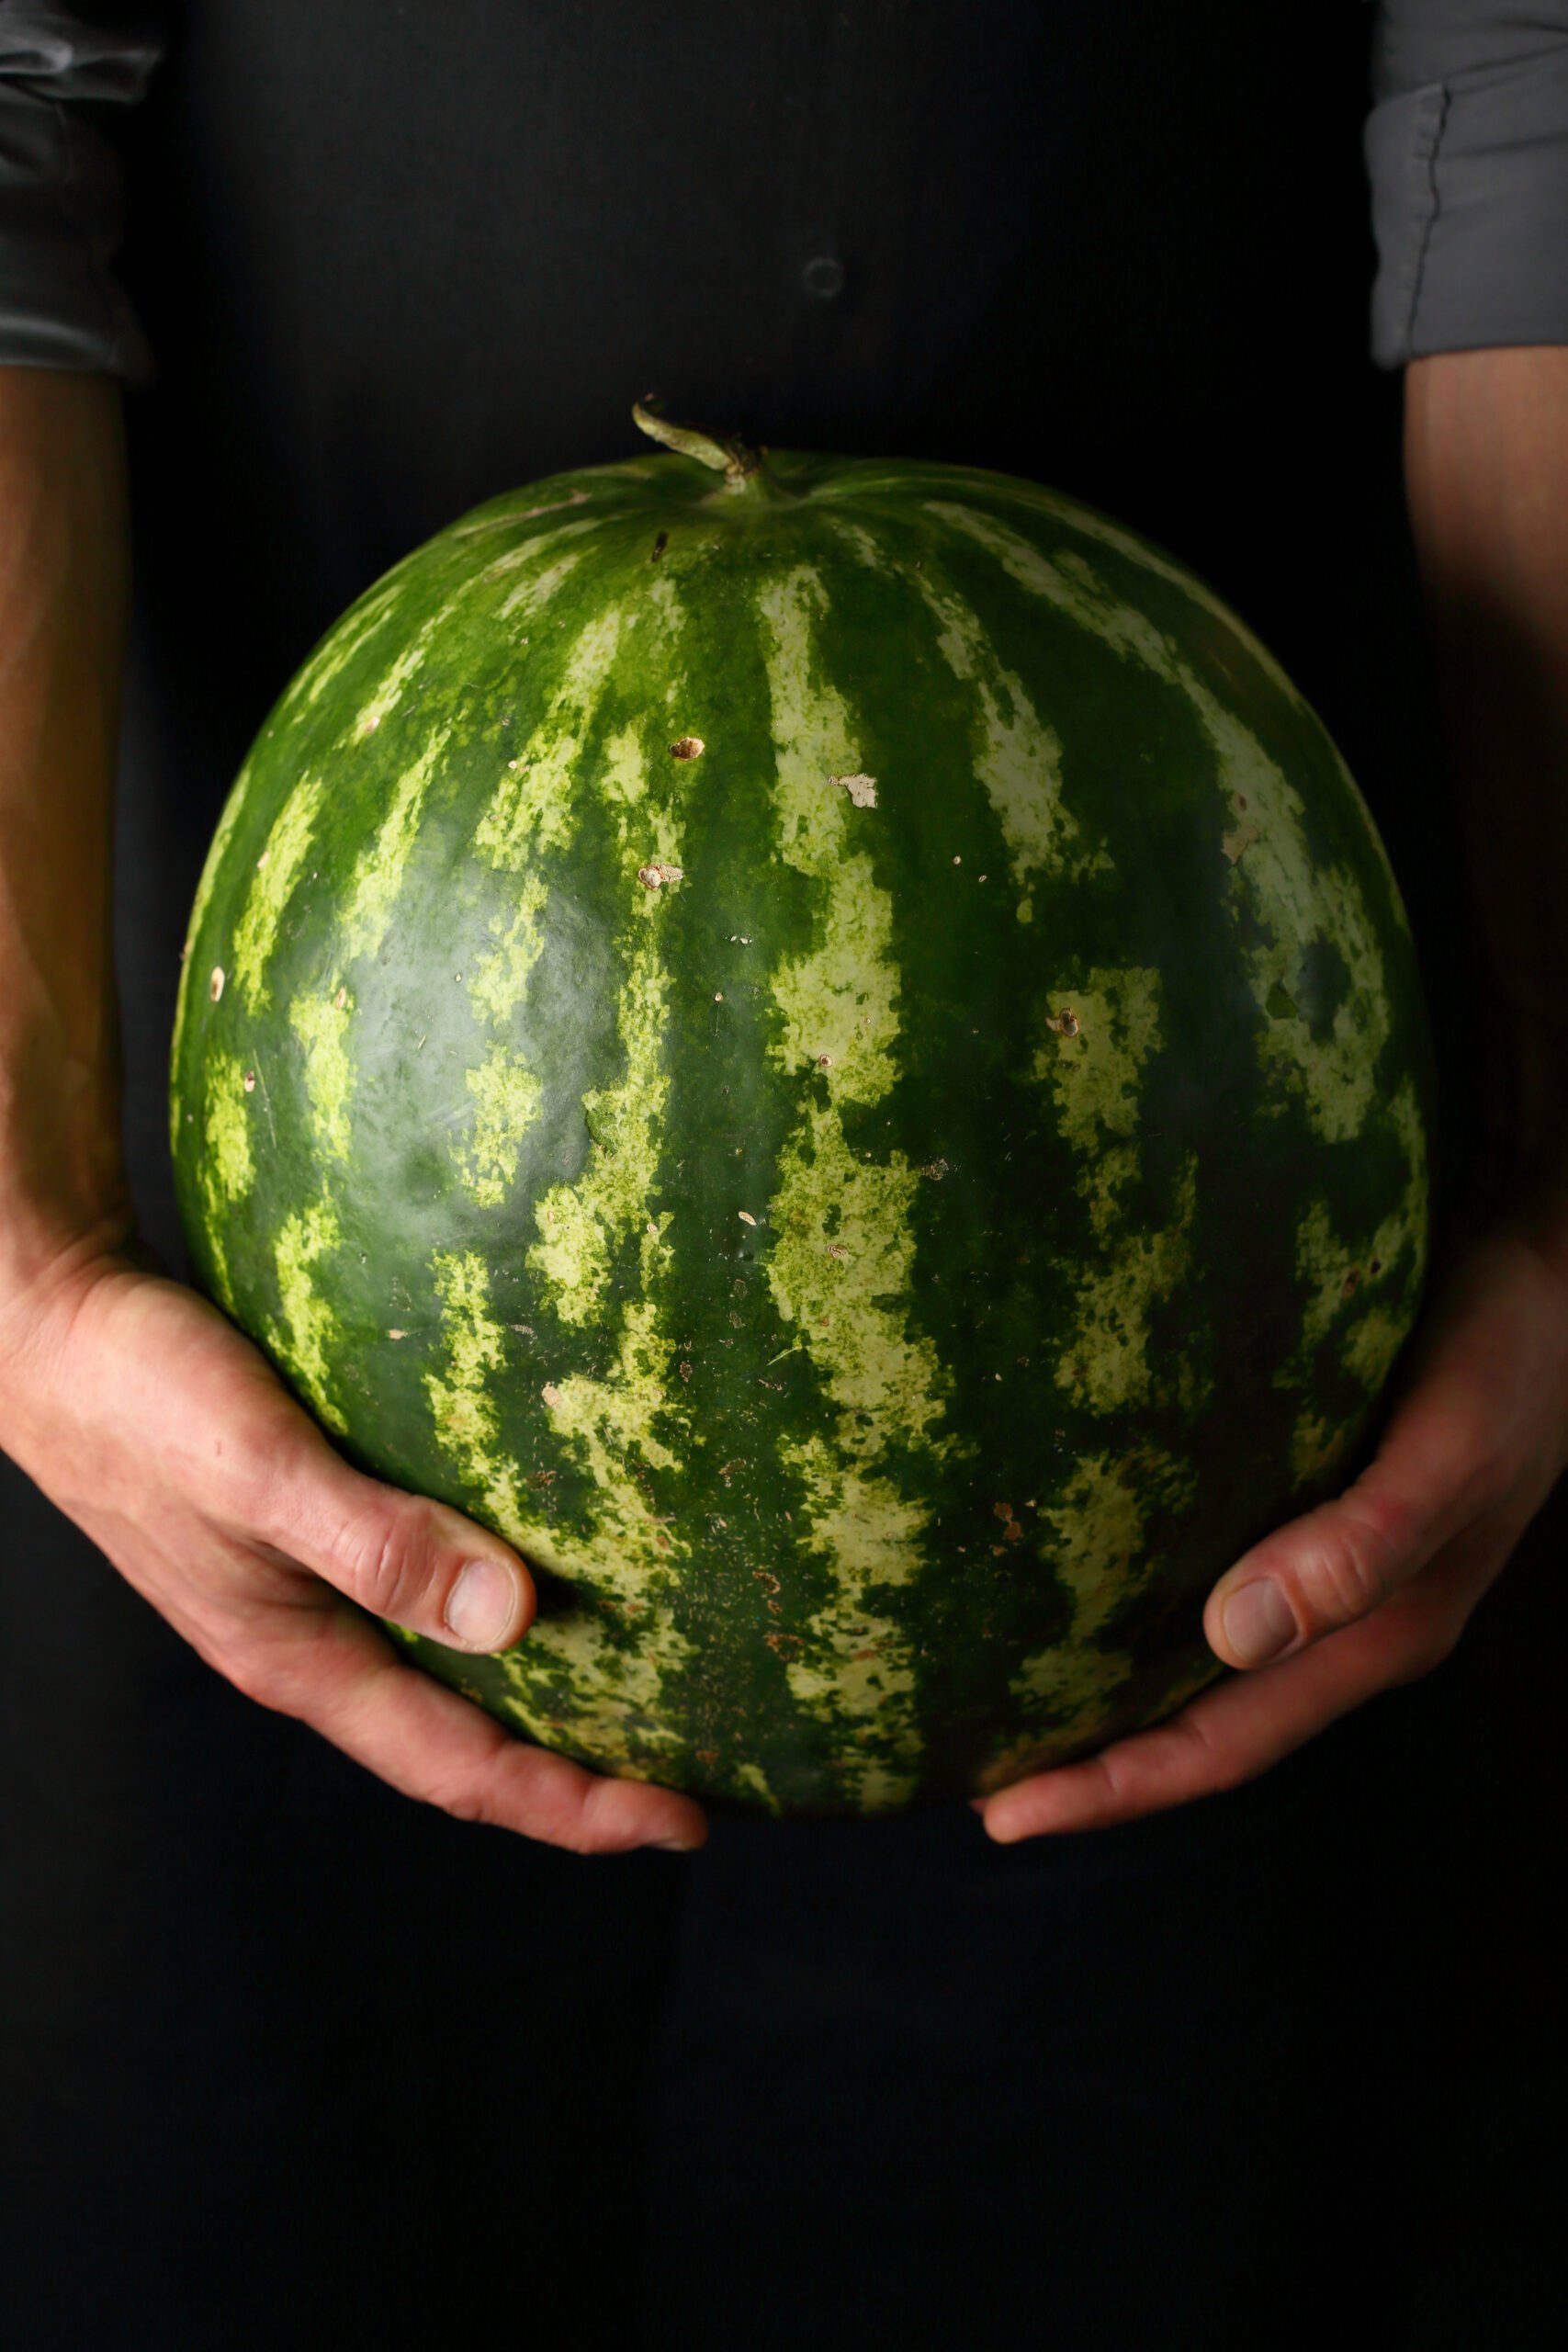 watermelon being held up